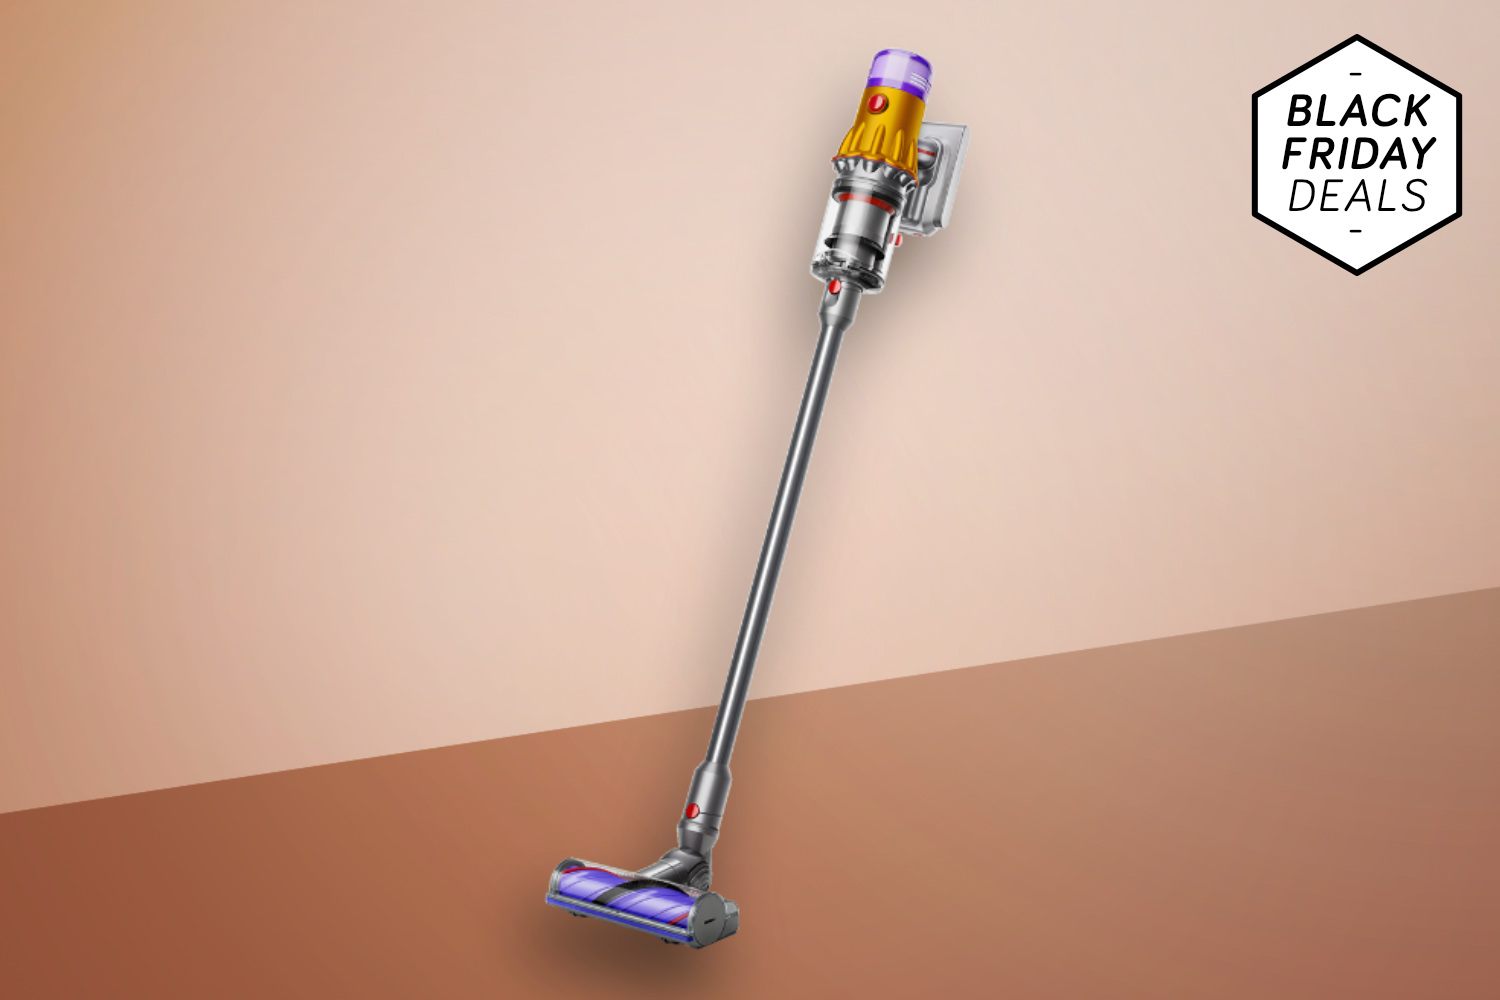 Dyson's V12 Detect Slim Absolute vacuum is £100 off ahead of Black Friday